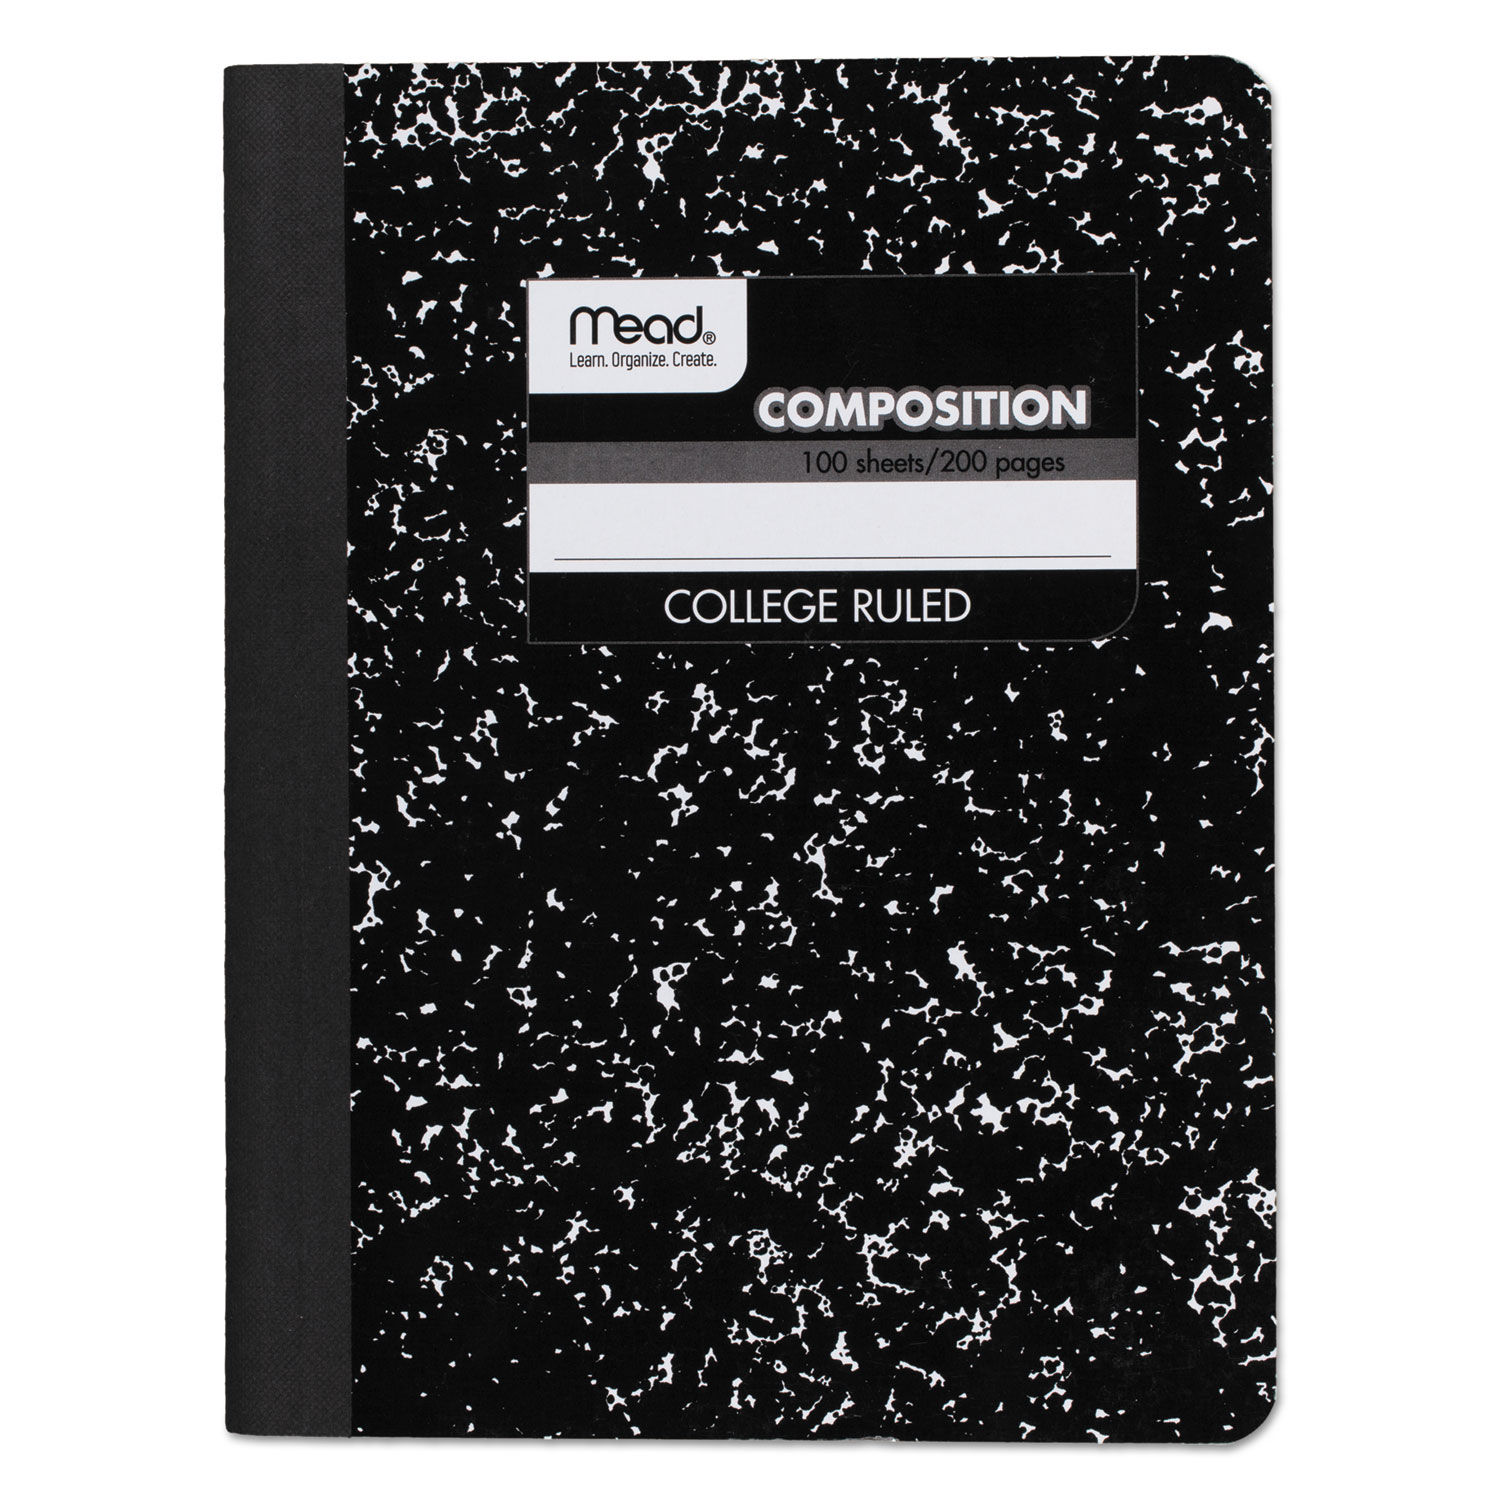 Square Deal Composition Book Medium/College Rule, Black Cover, (100) 9.75 x 7.5 Sheets